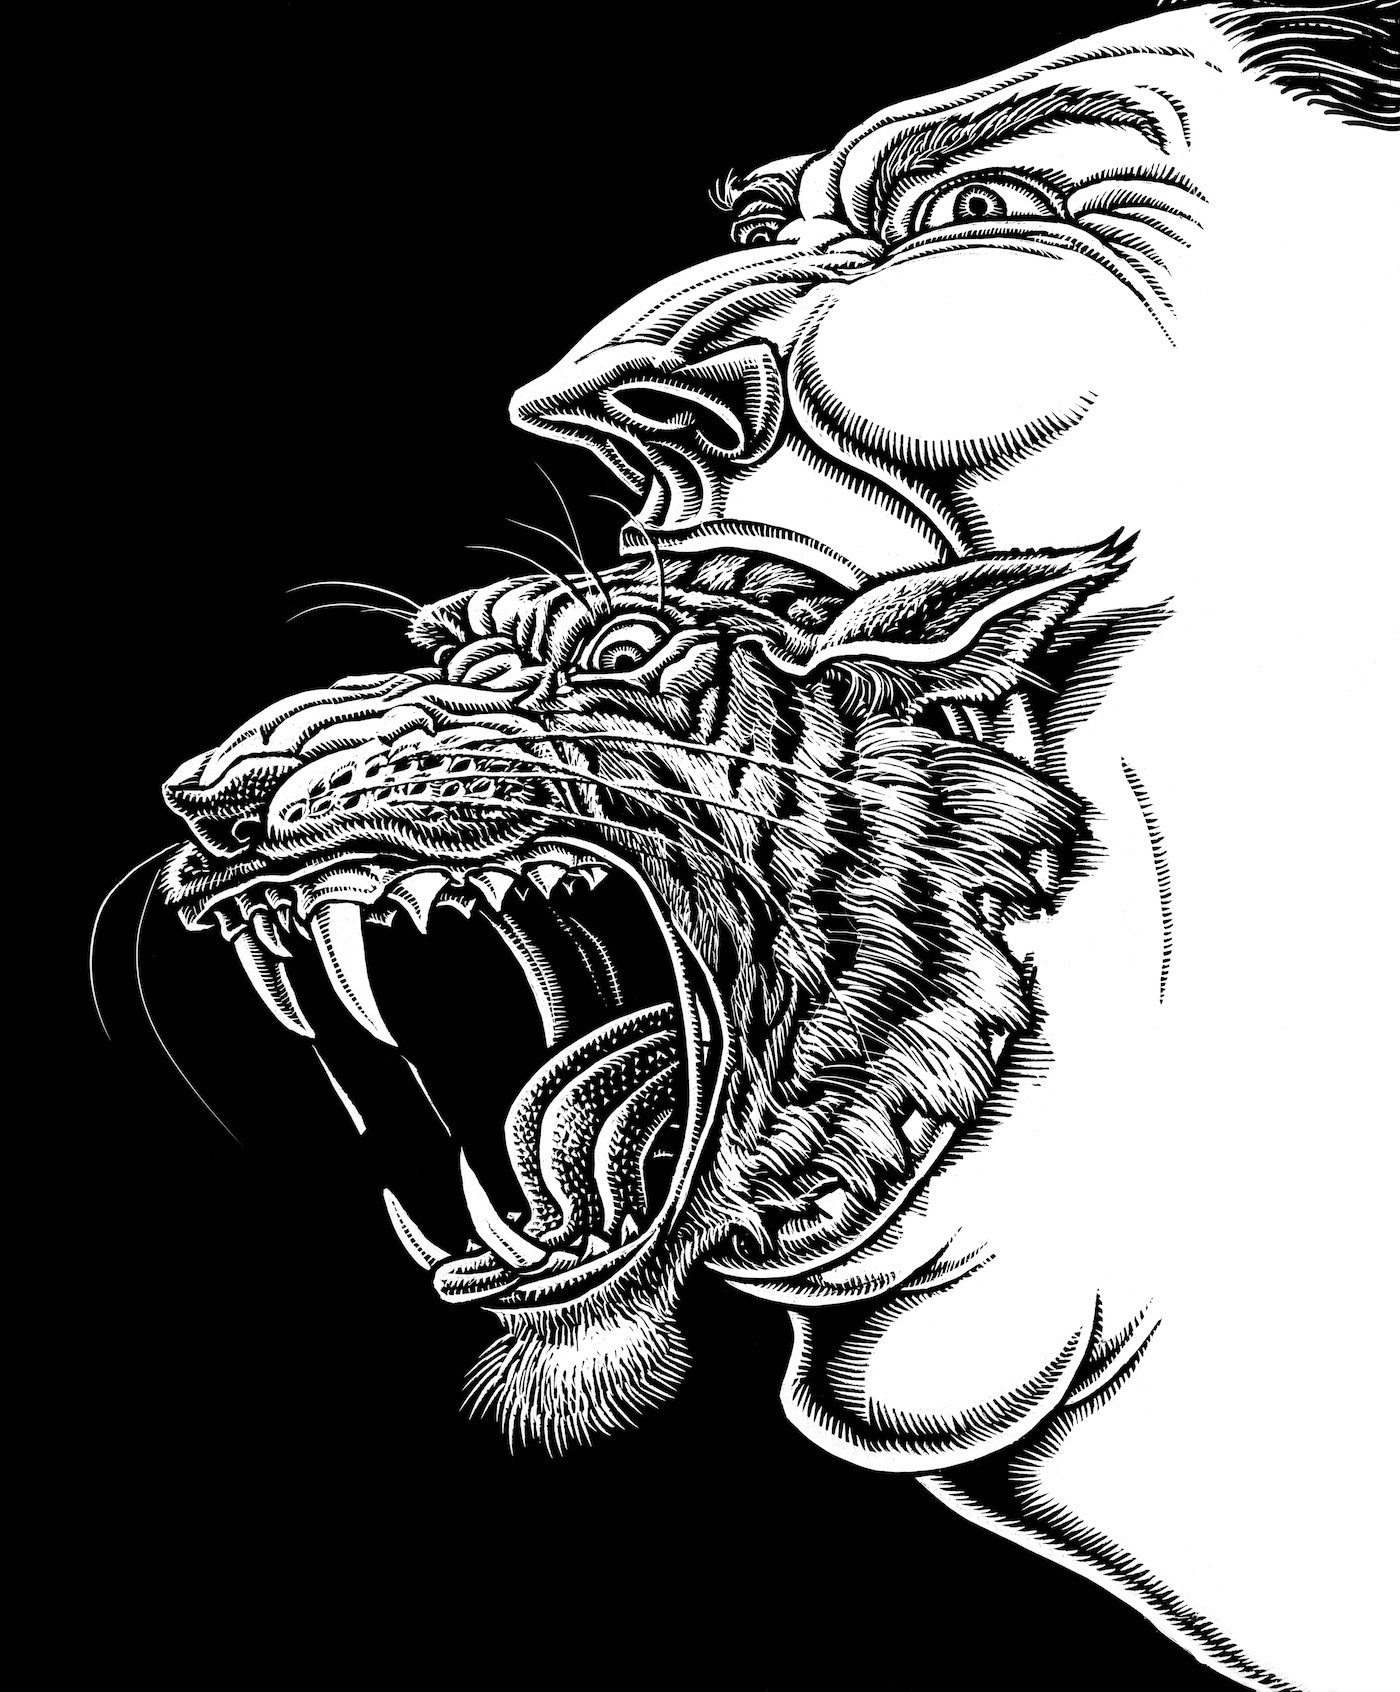 seven deadly sins: anger (tiger from mouth)